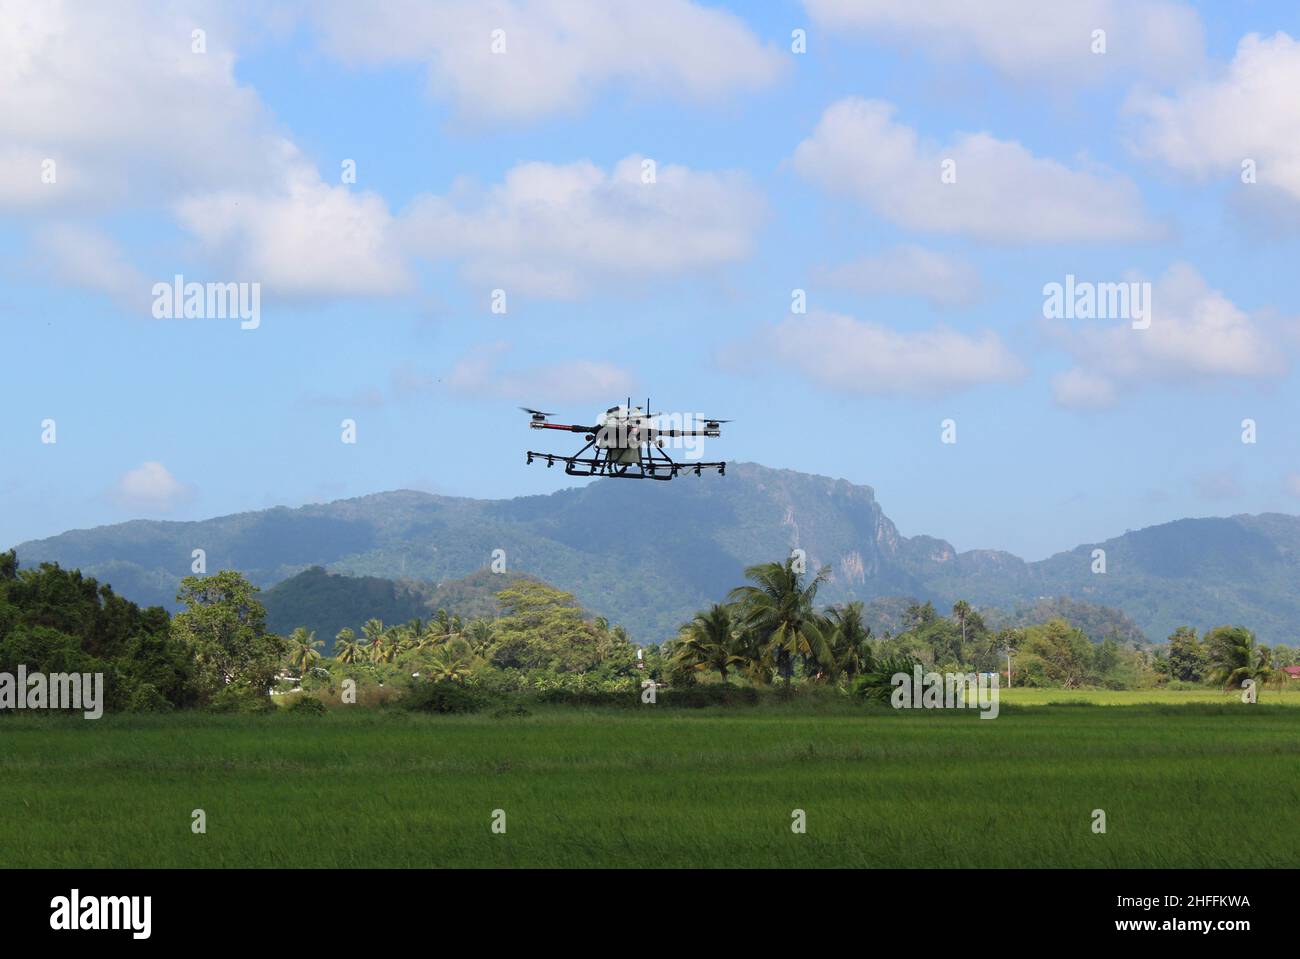 Agricultural drone use to spray pesticides in paddy field Stock Photo